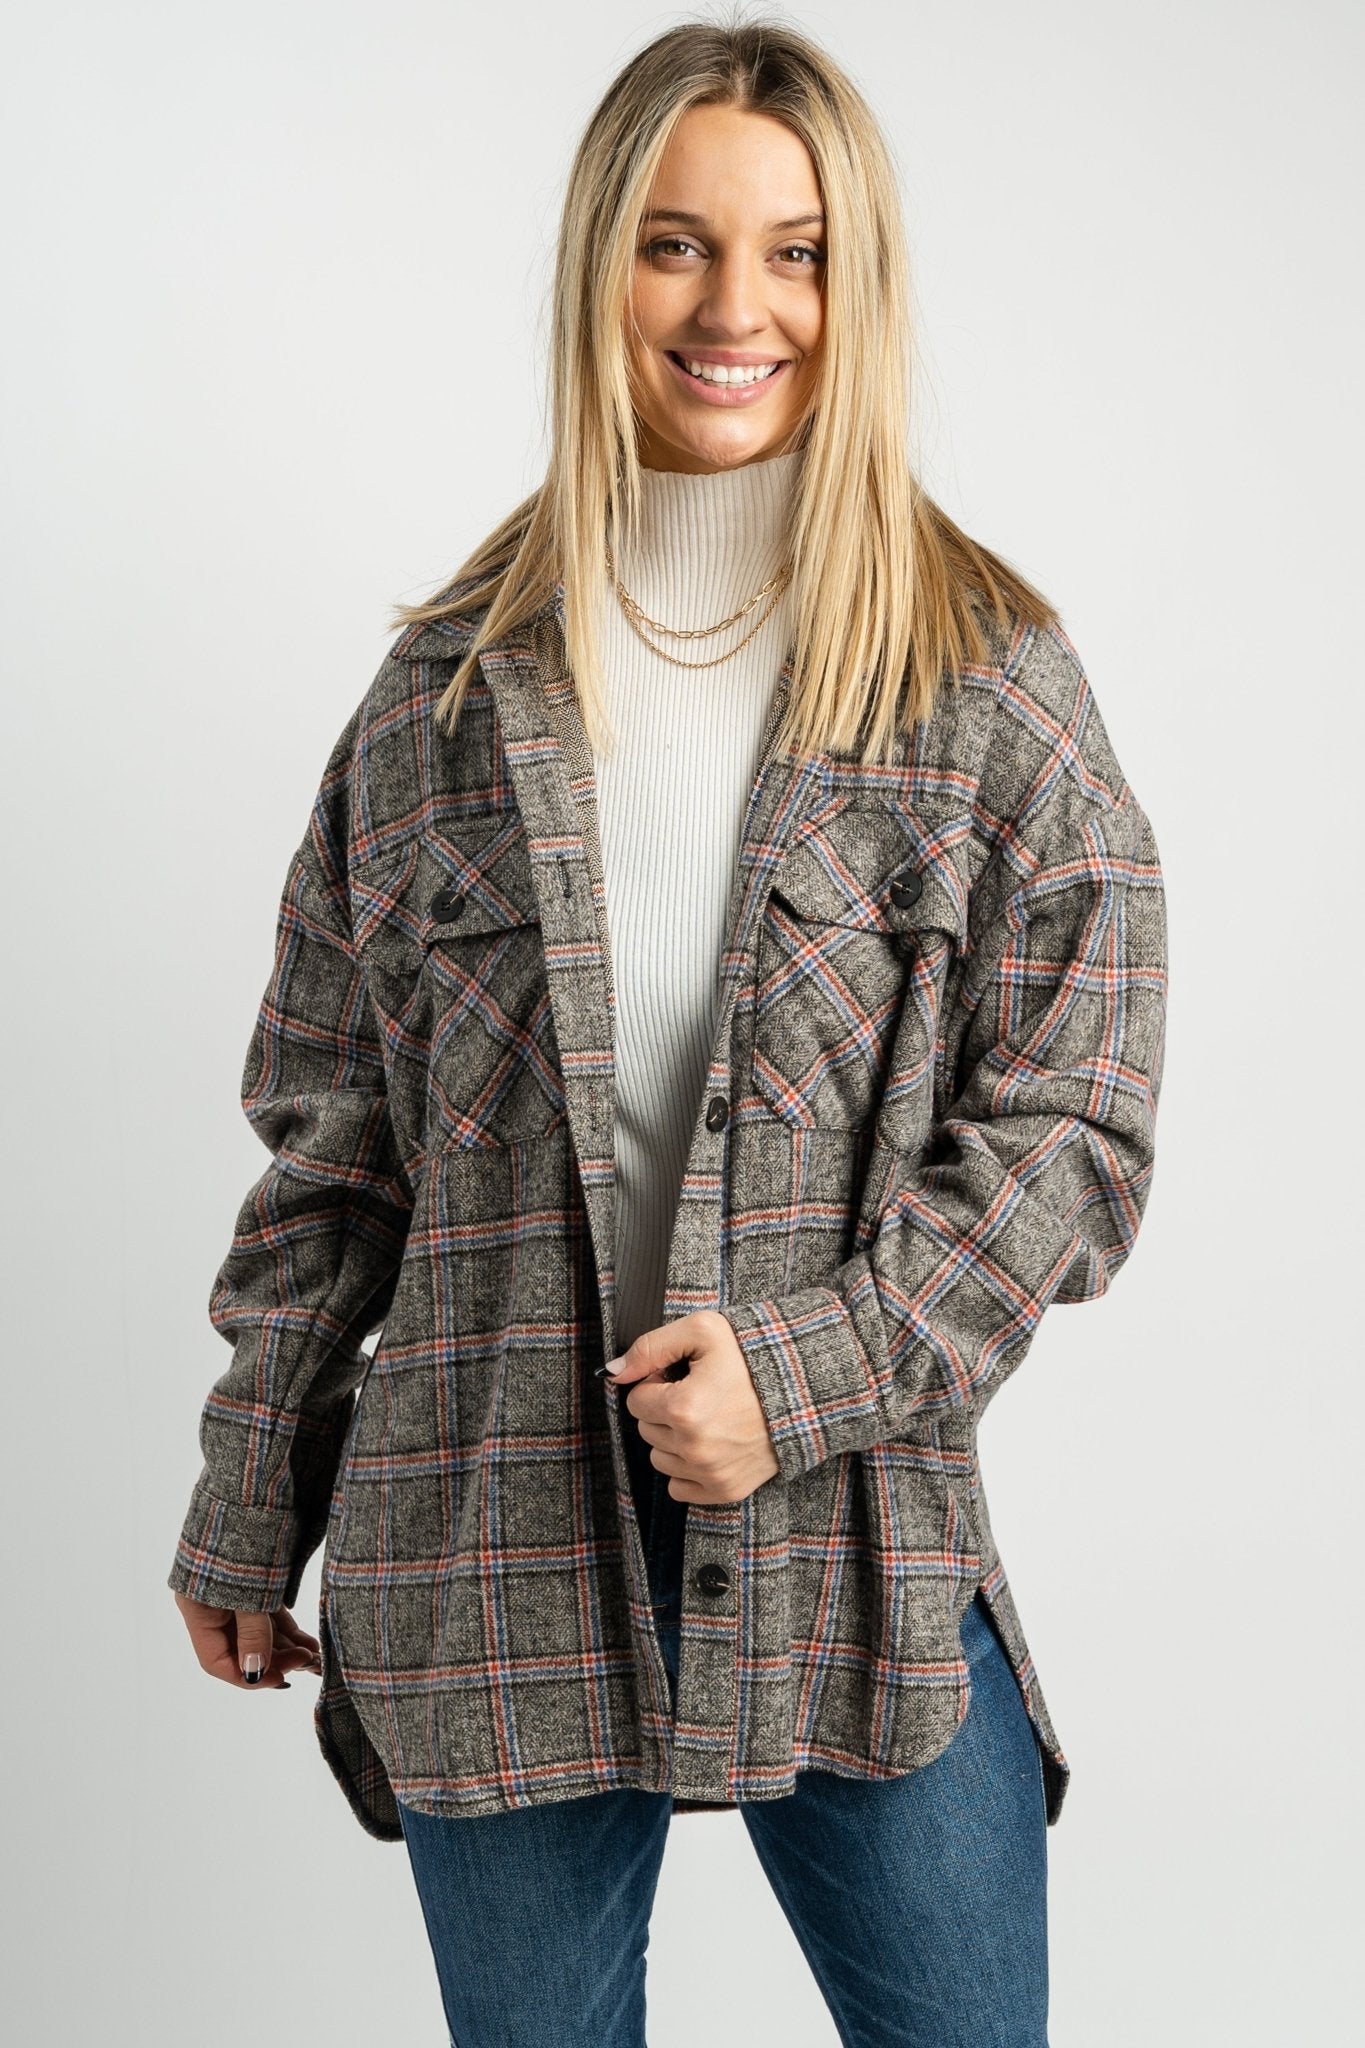 Oversized plaid shacket charcoal - Affordable Shirts & Tops - Boutique Jackets & Blazers at Lush Fashion Lounge Boutique in Oklahoma City